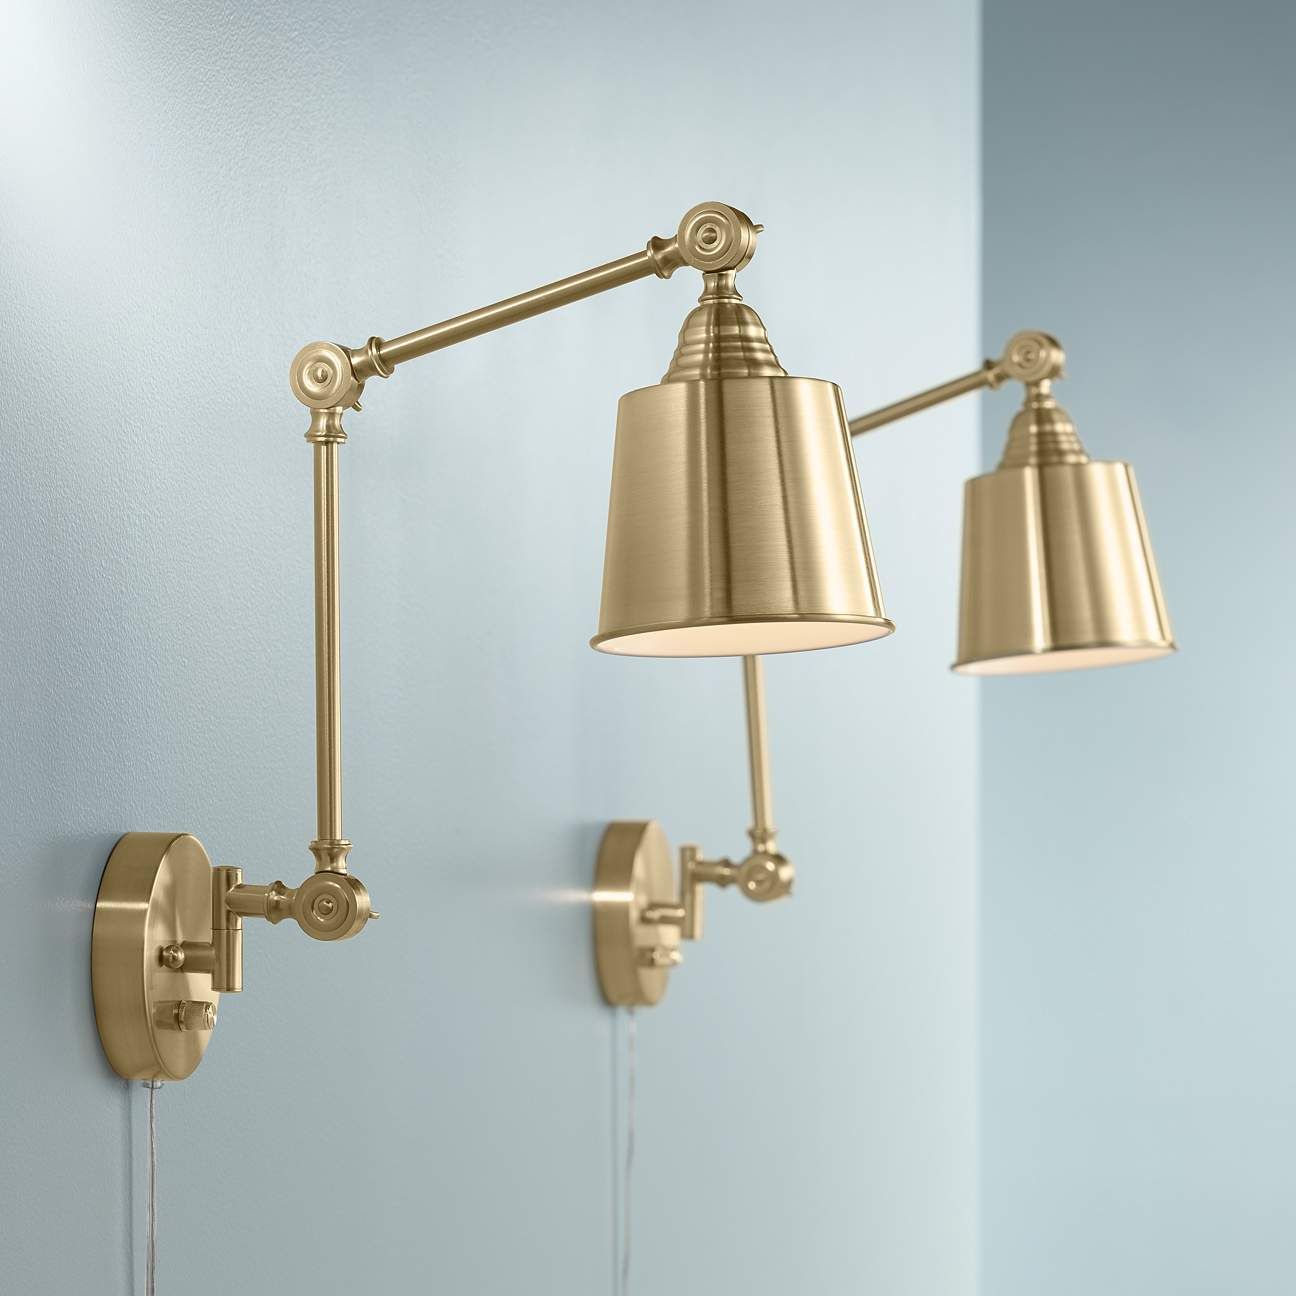 Mendes Antique Brass Downlight Swing Arm Plug-In Wall Lamps Set of 2 | Lamps Plus